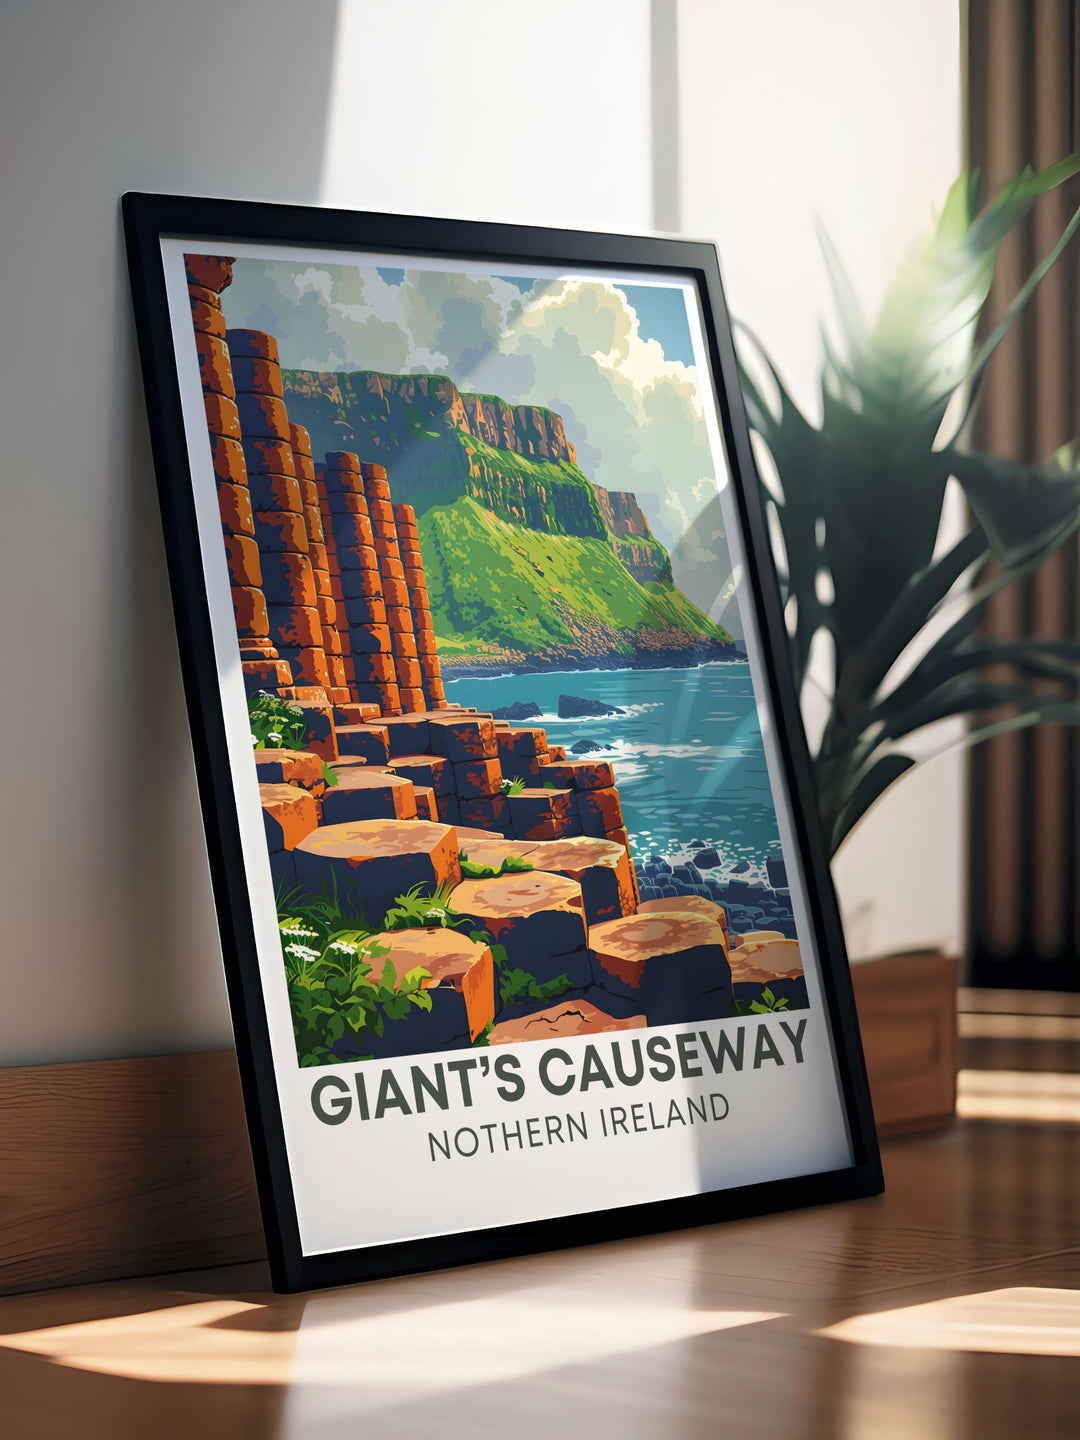 Modern wall decor featuring the Amphitheatre, capturing the stunning views of the cliffs and ocean, with its dramatic landscapes and natural beauty, ideal for adding a touch of Irish coastal charm to any space.